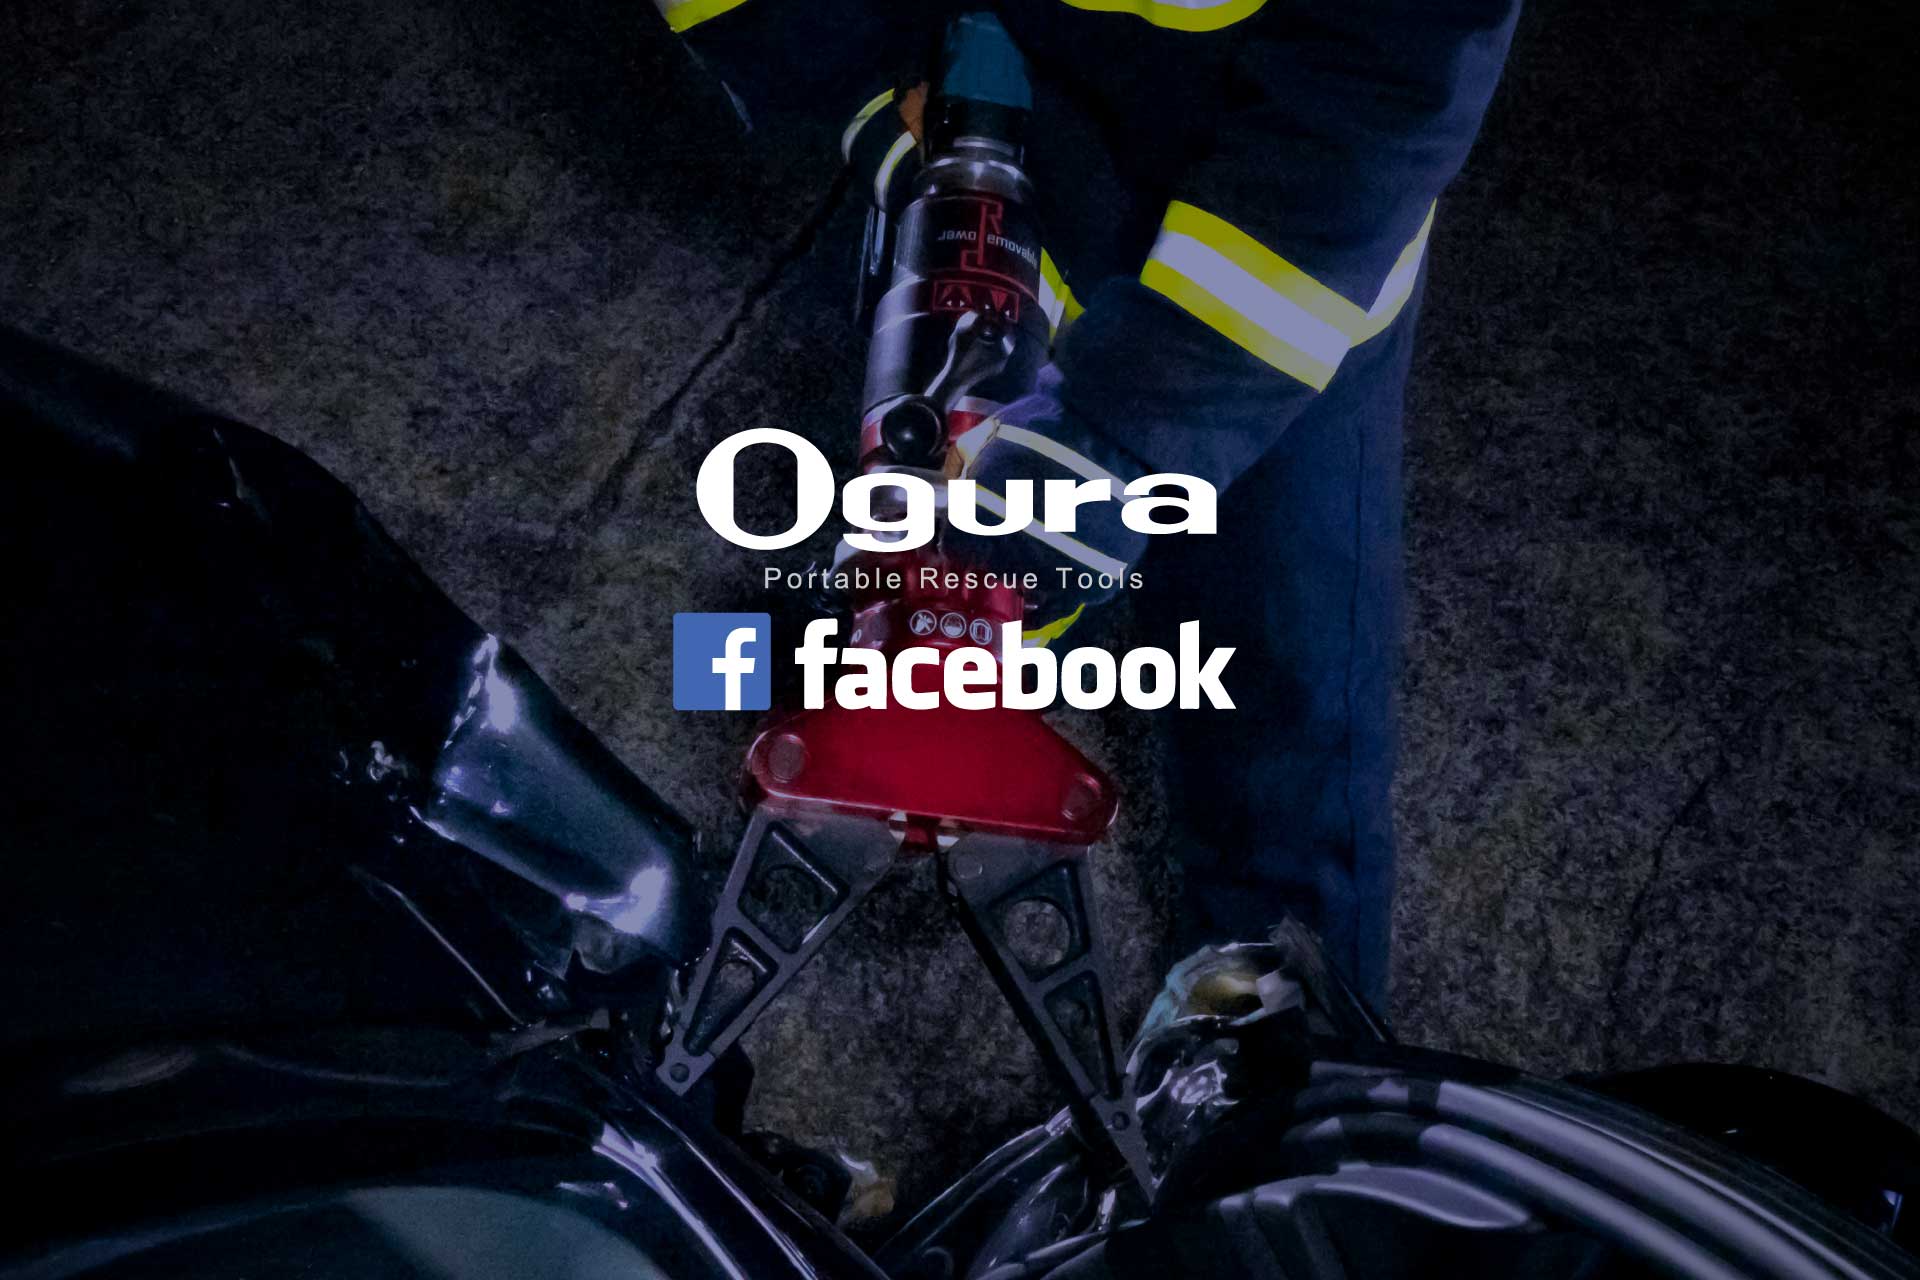 Launched the Ogura Rescue Tools Facebook Fan Page